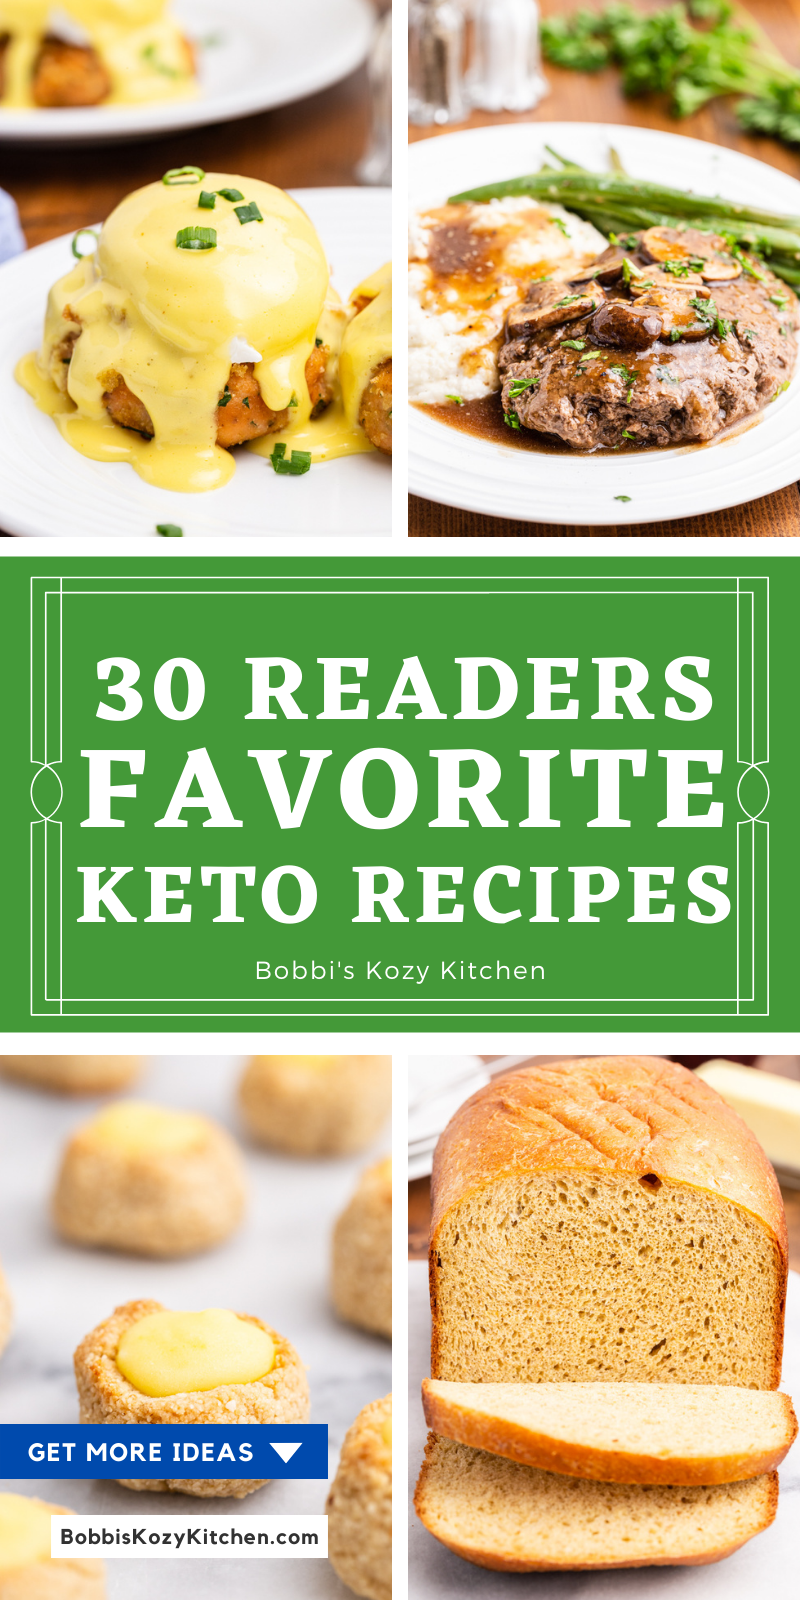 Readers Favorite Keto and Low Carb Recipes - Need some keto recipe ideas and inspiration? Check out the 30 most popular keto and low carb recipes from the past year! #keto #lowcarb #glutenfree #recipes #2021 #readers #favorite